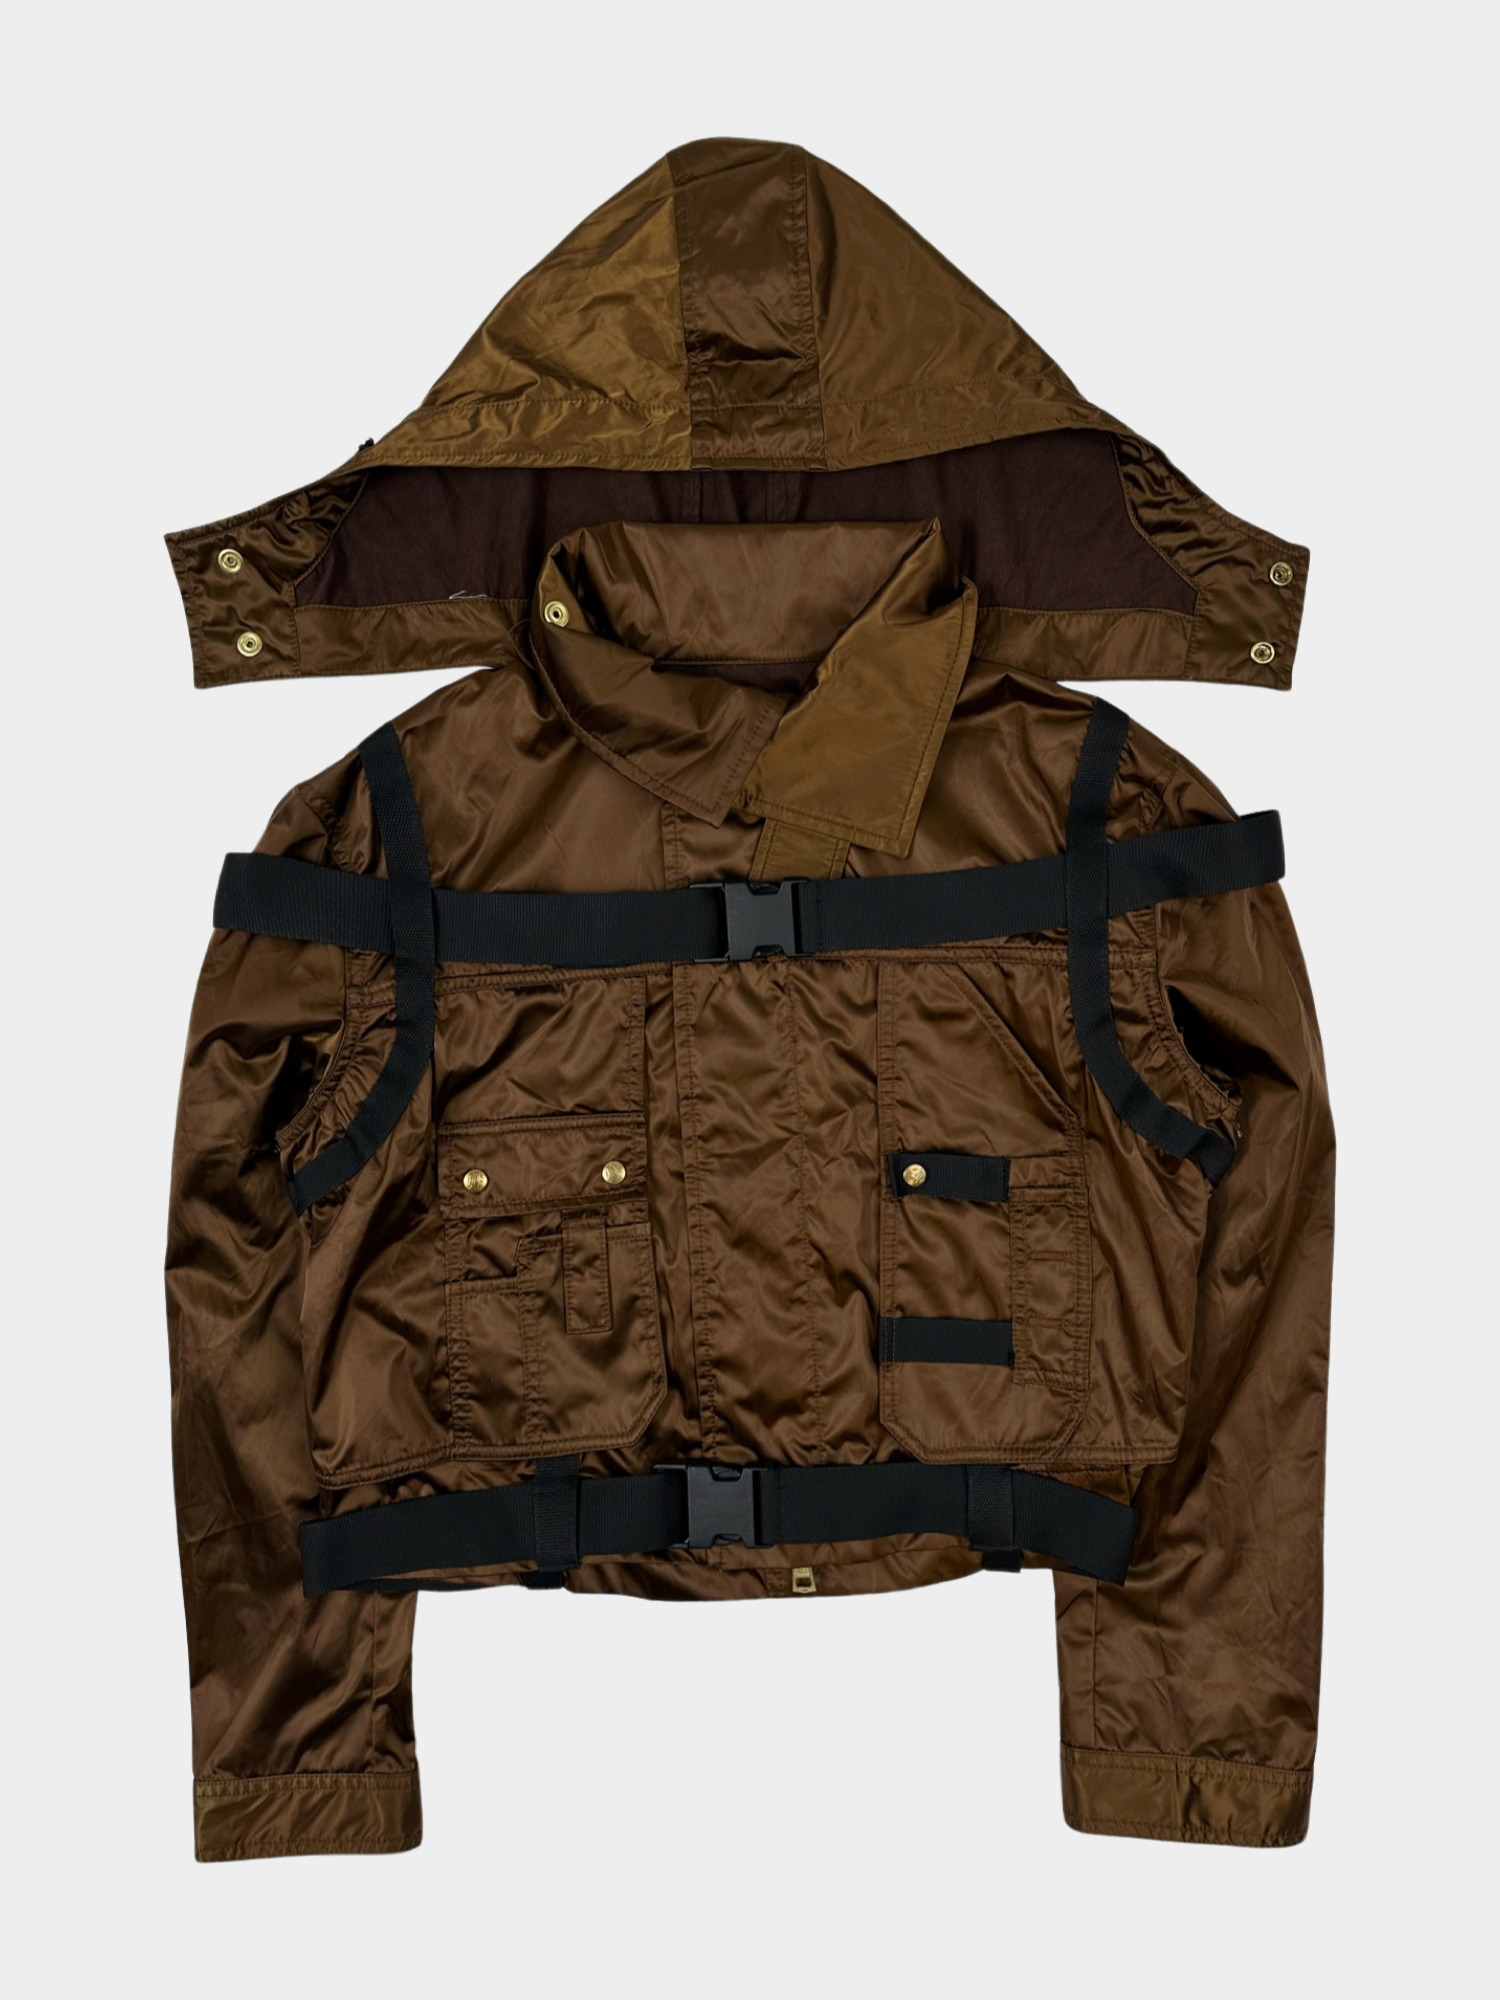 JEAN PAUL GAULTIER Brown Parachute Bomber Jacket - ARCHIVED